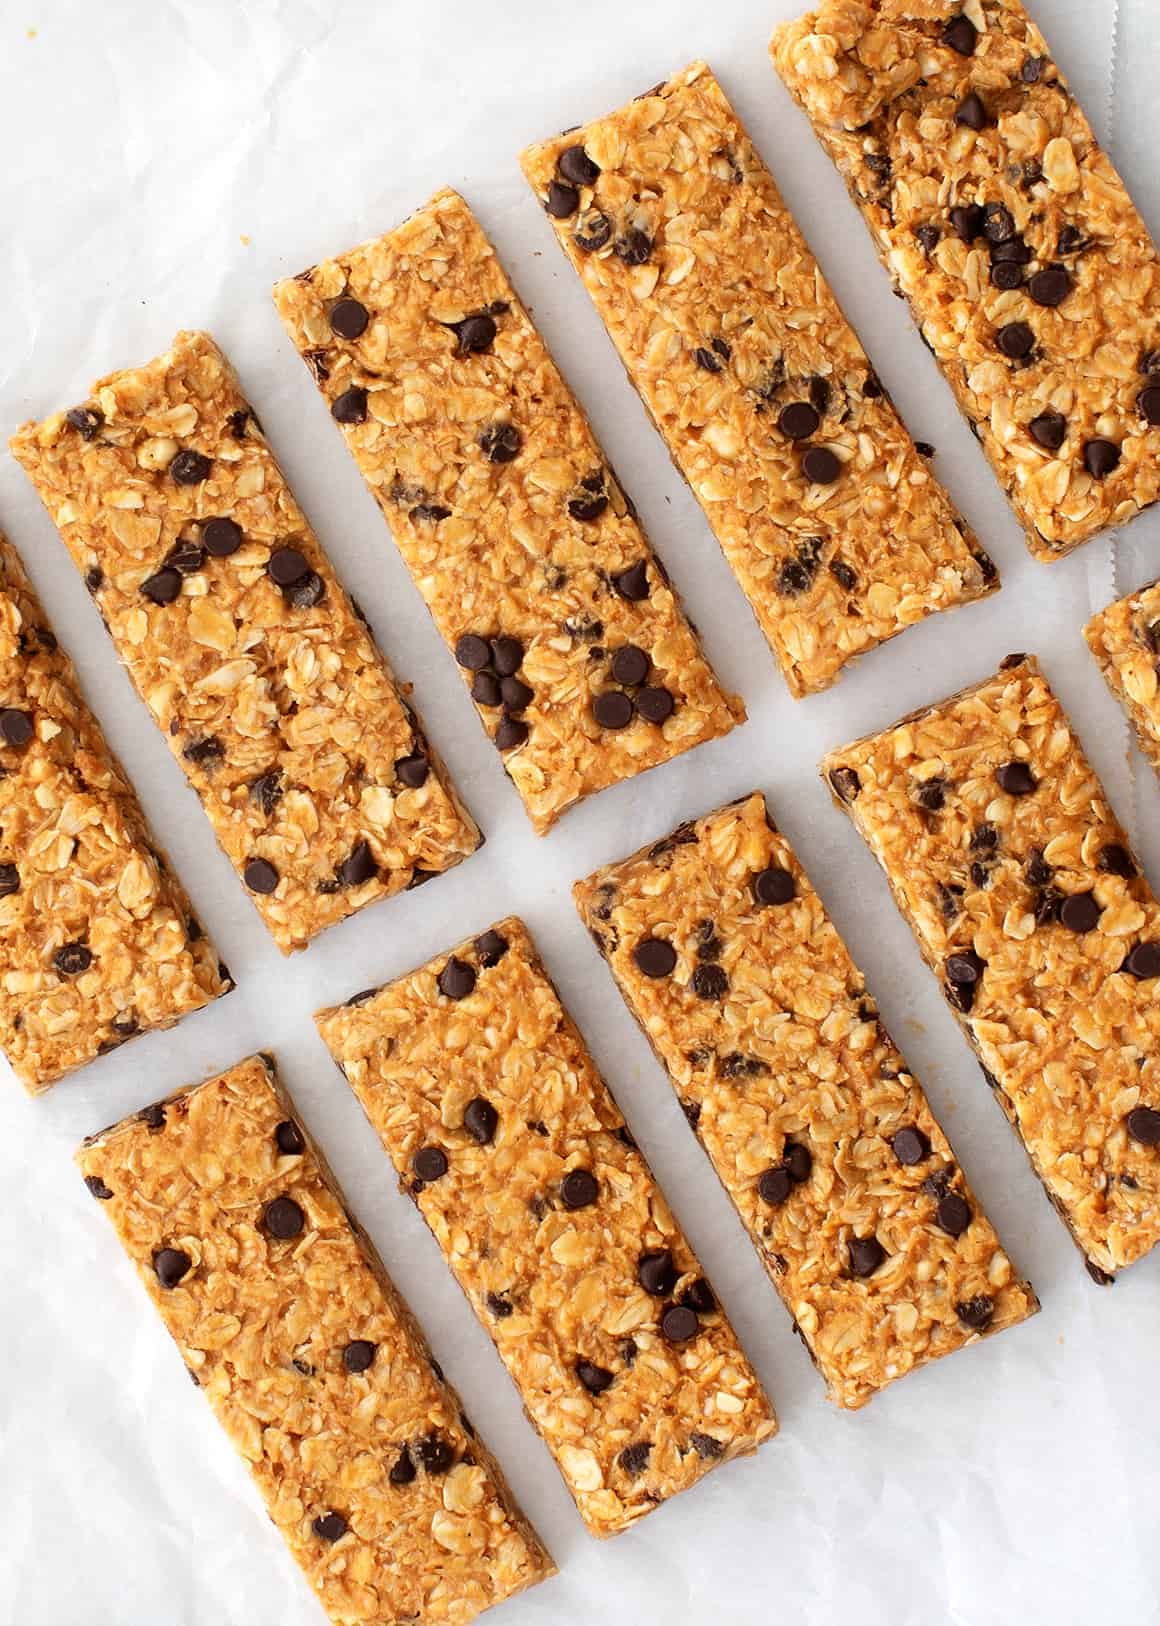 Homemade granola bars on parchment paper.